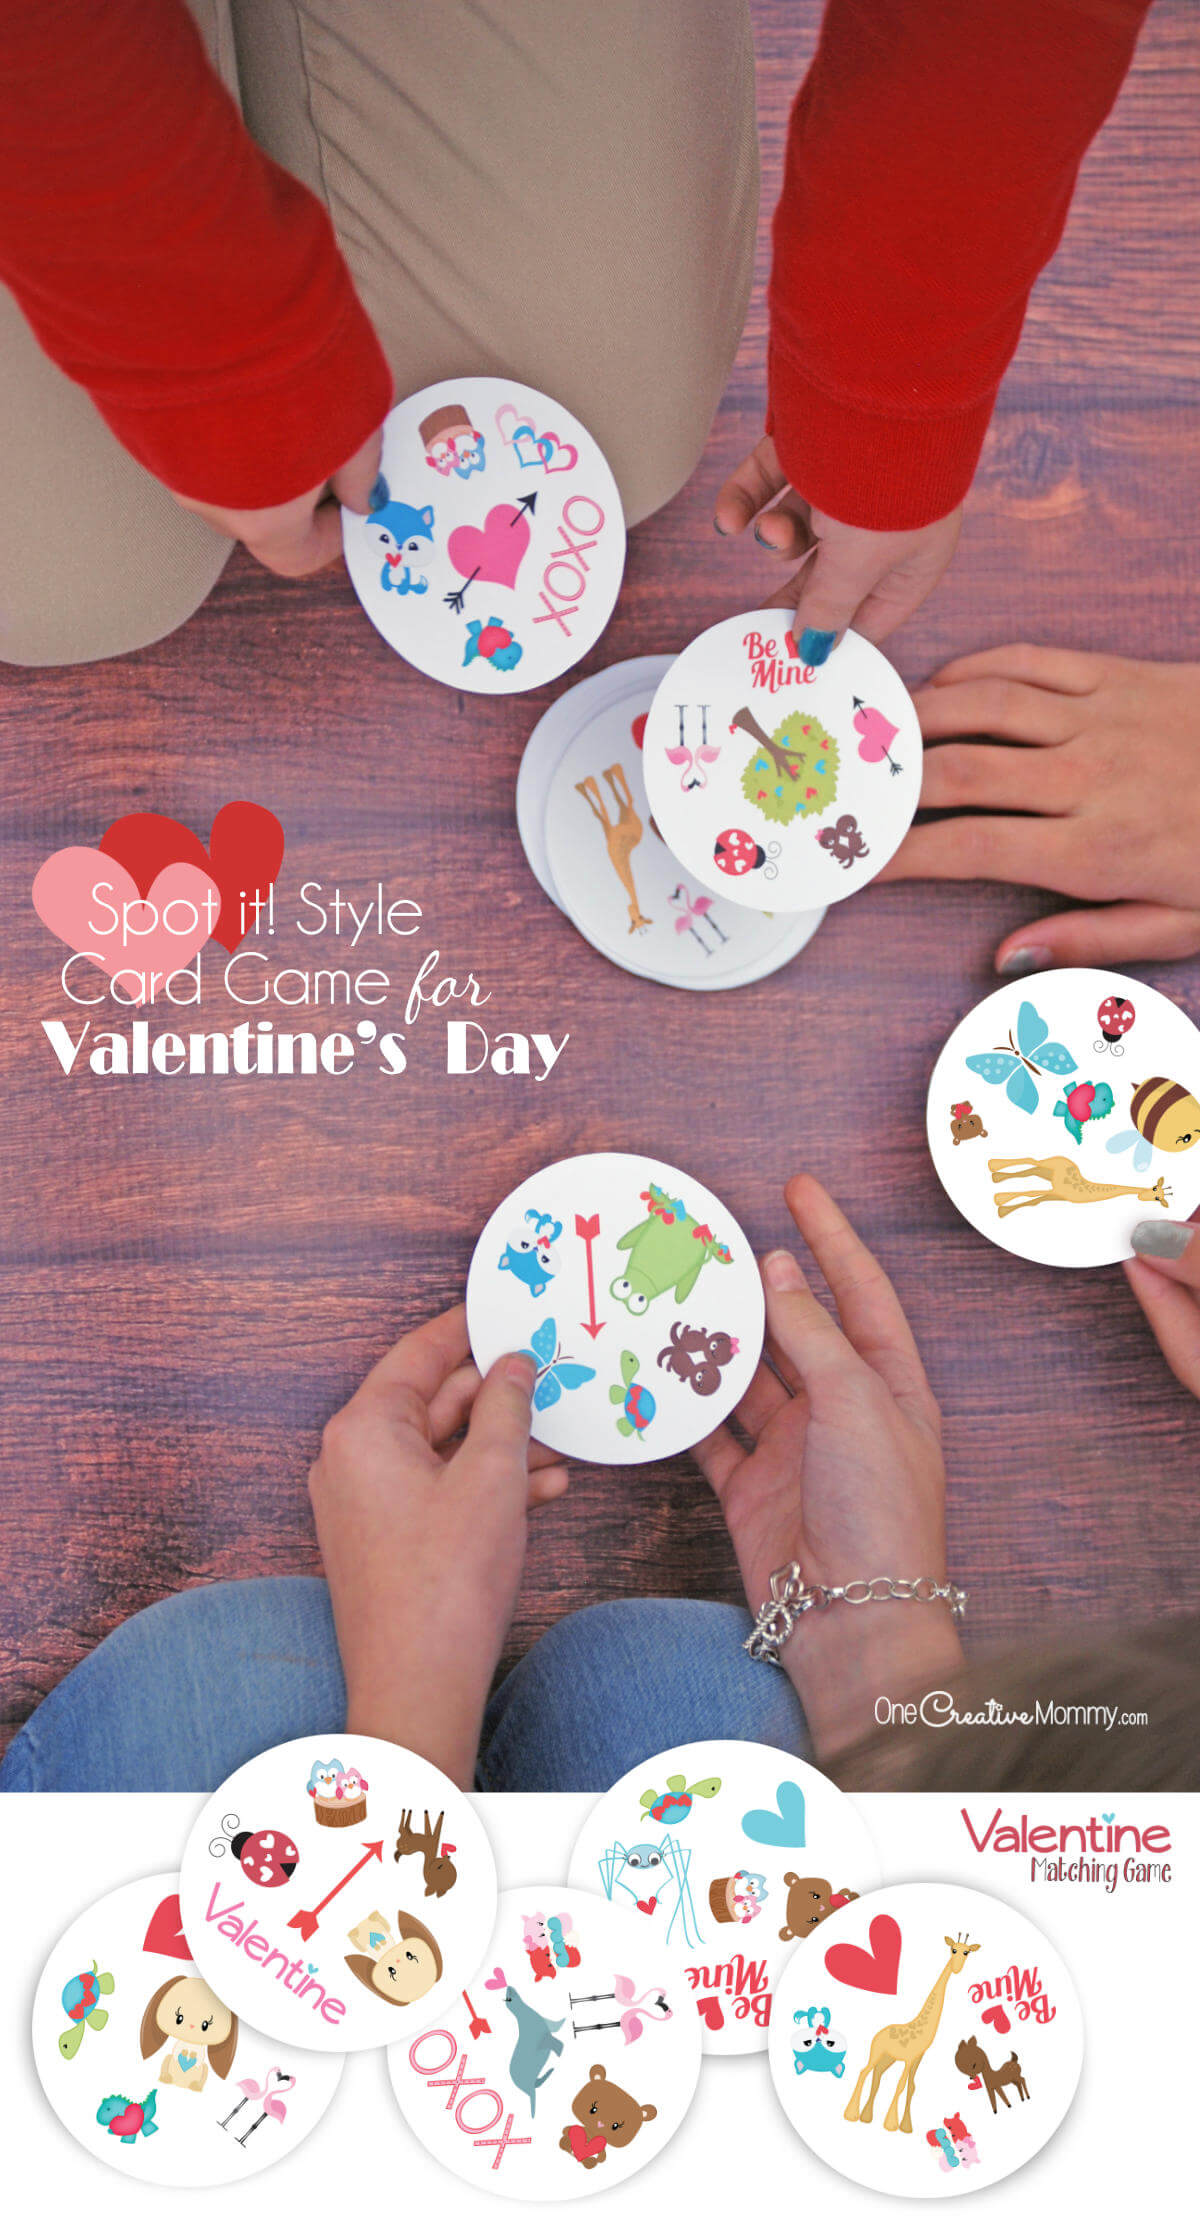 Closeup of three young girls playing Valentine's Day Spot It card game. Cards are round and contain valentine-themed images. There are several enlarged images of the cards at the bottom.